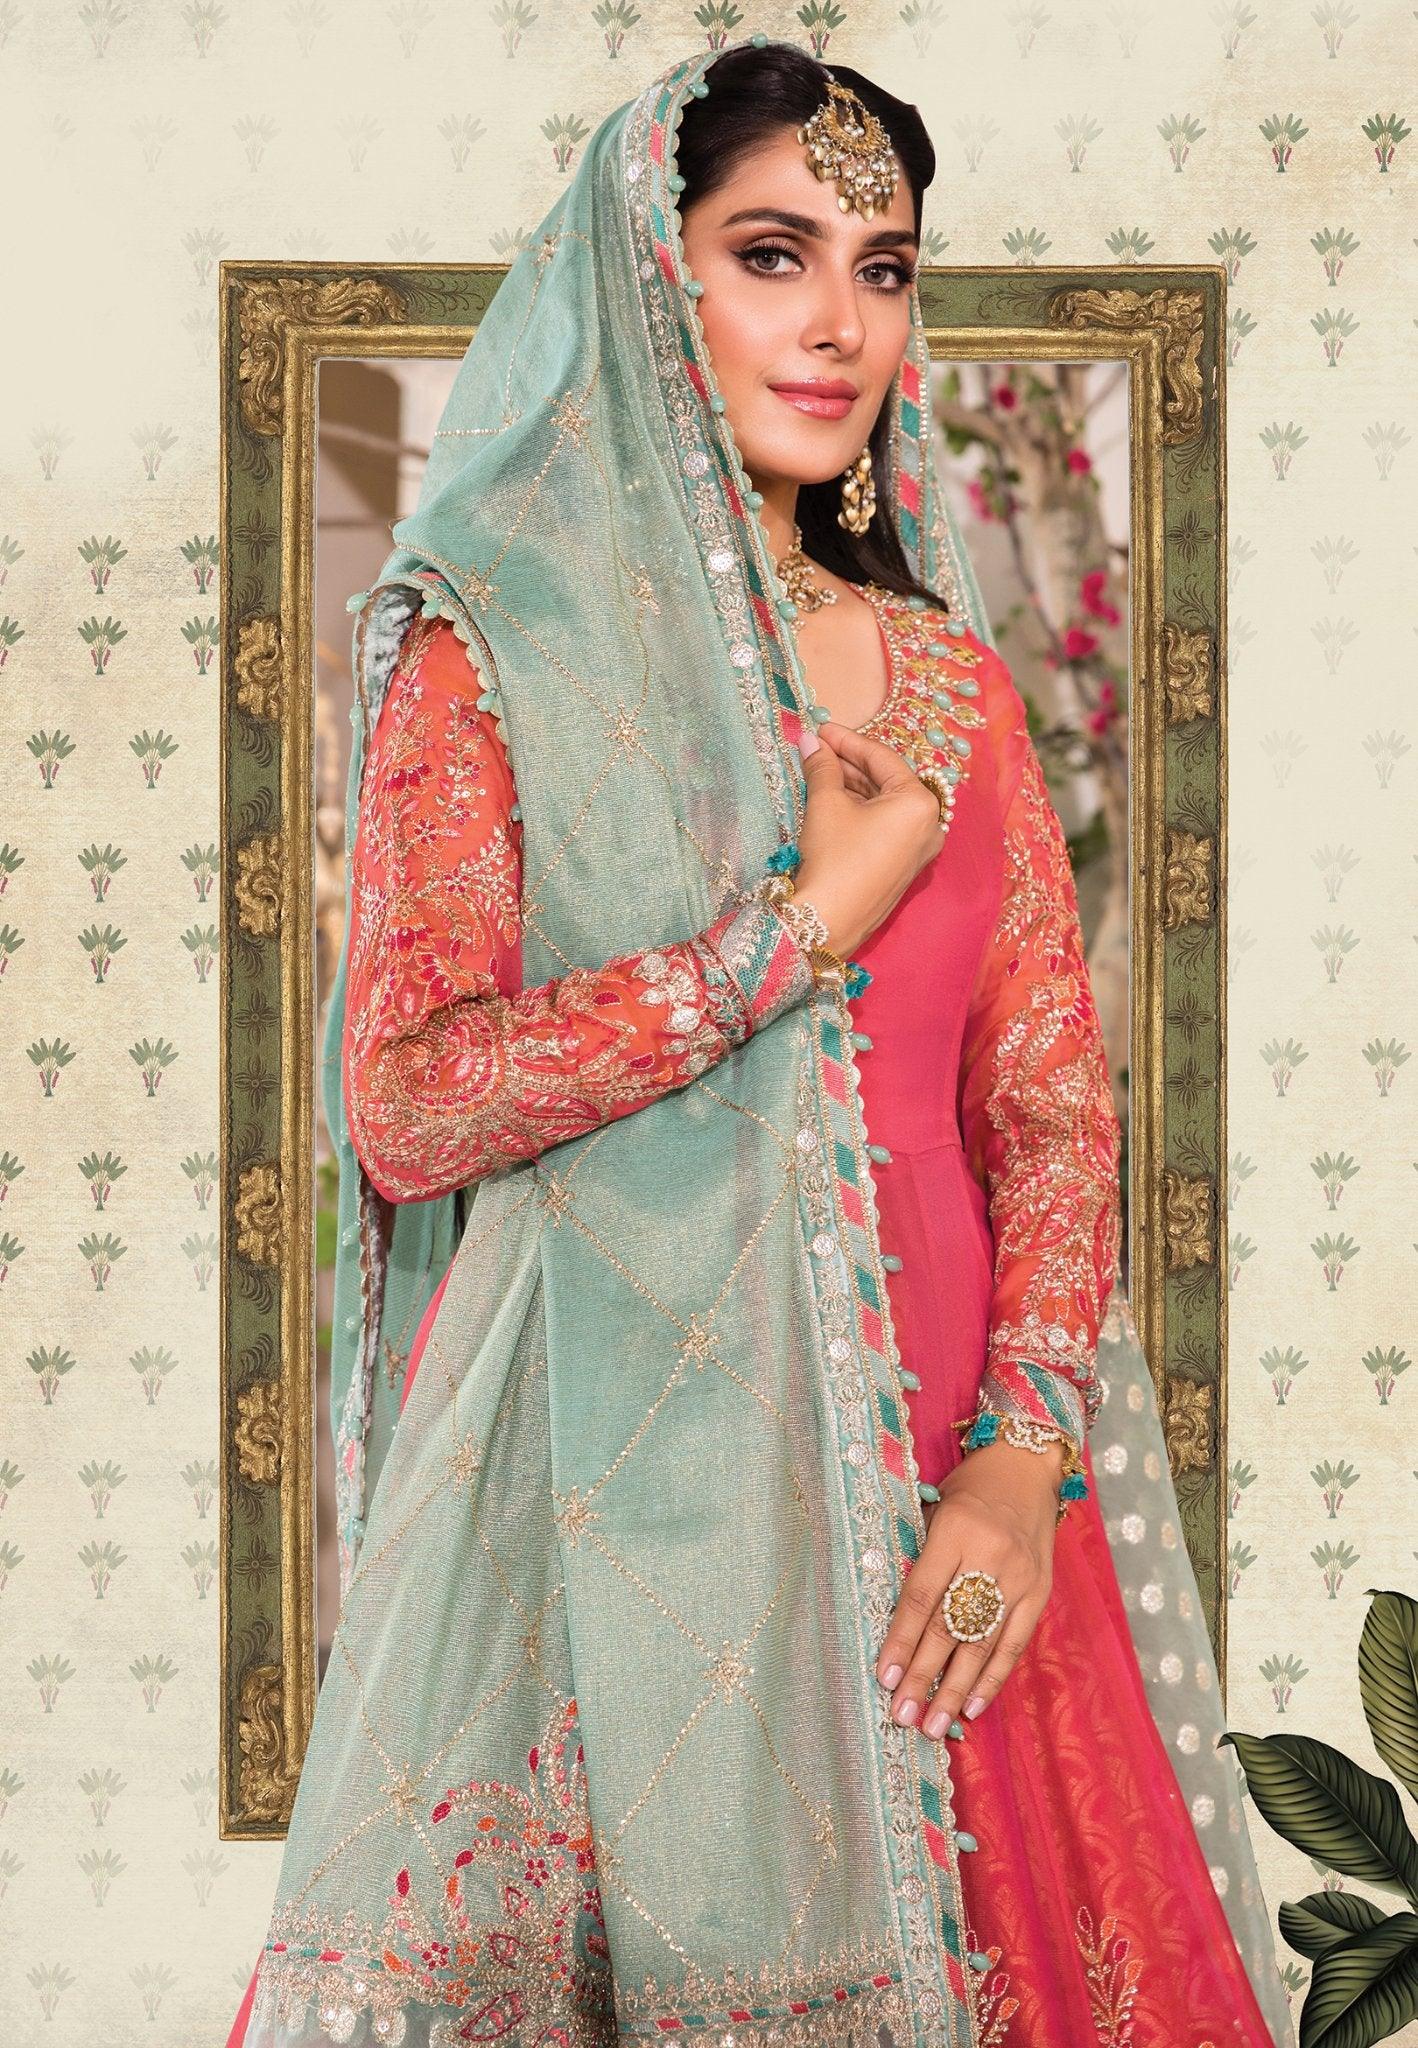 Maria.B - Mbroidered Hertiage Edition'22- Salmon Pink and Feroza D#02 - Maria.B - Mbroidered Hertiage Edition'22- Salmon Pink and Feroza D#02 - Shahana Collection